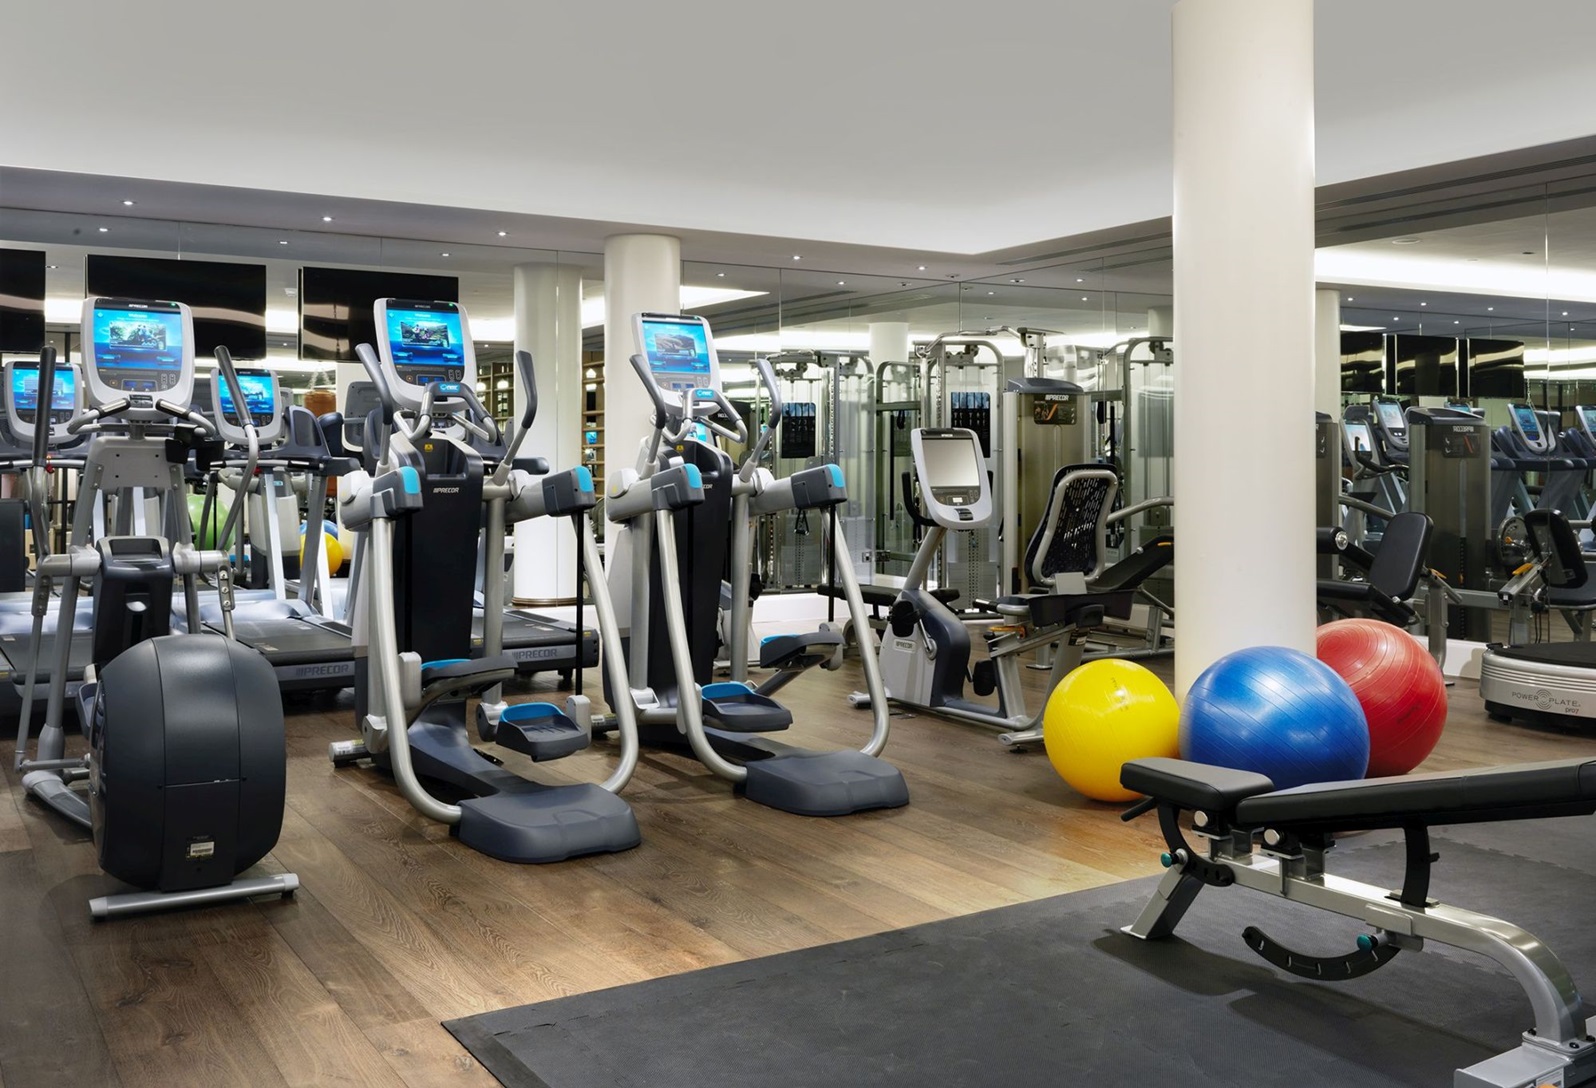 Firmdale Hotels - The Gym &amp; Hypoxic Studio